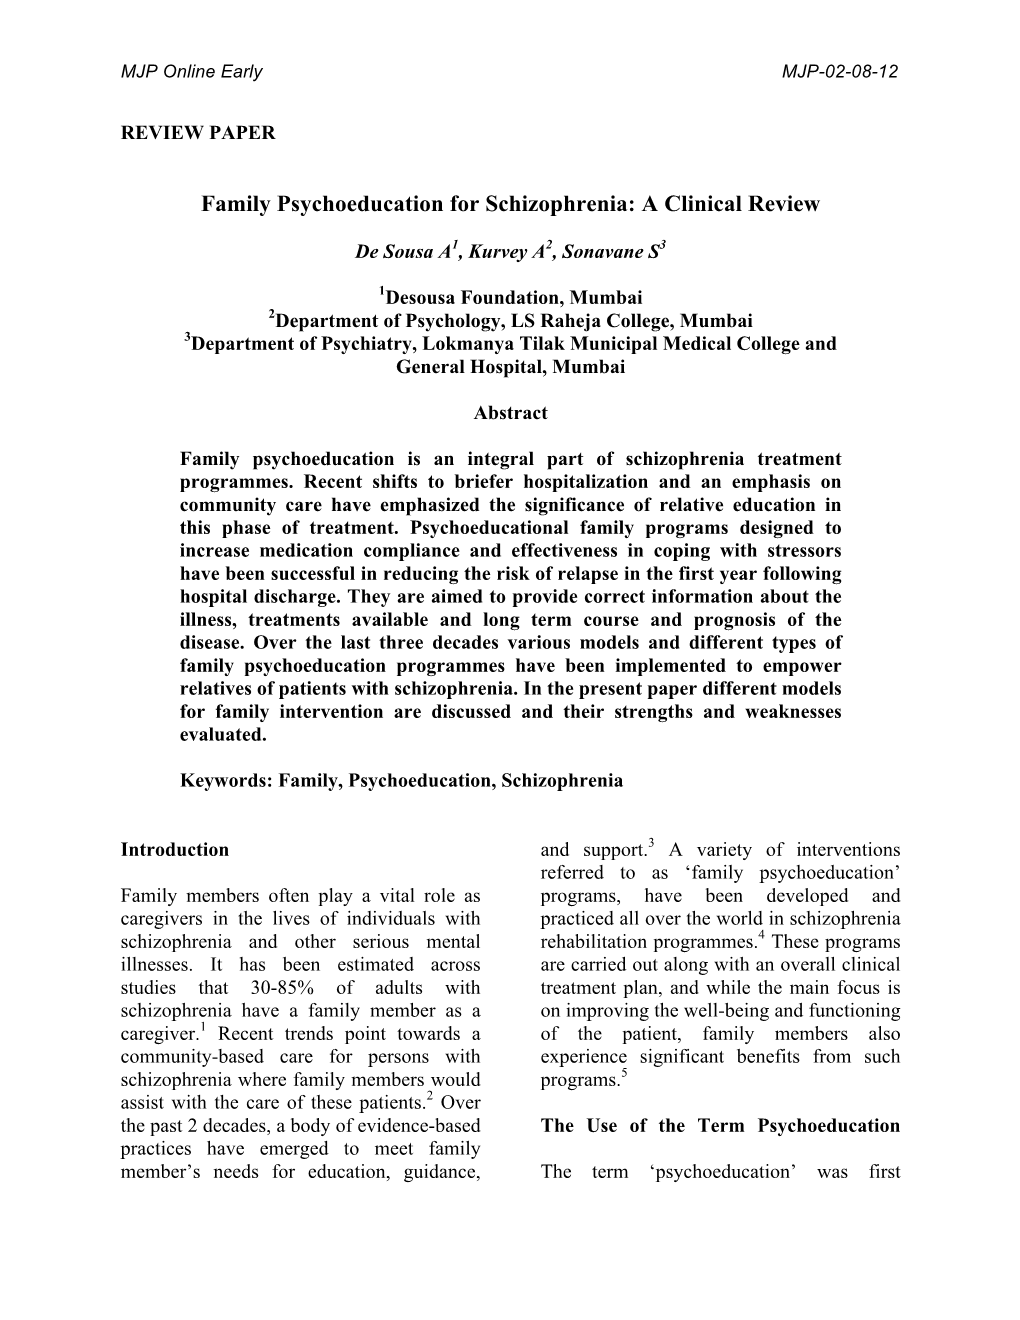 Family Psychoeducation for Schizophrenia: a Clinical Review